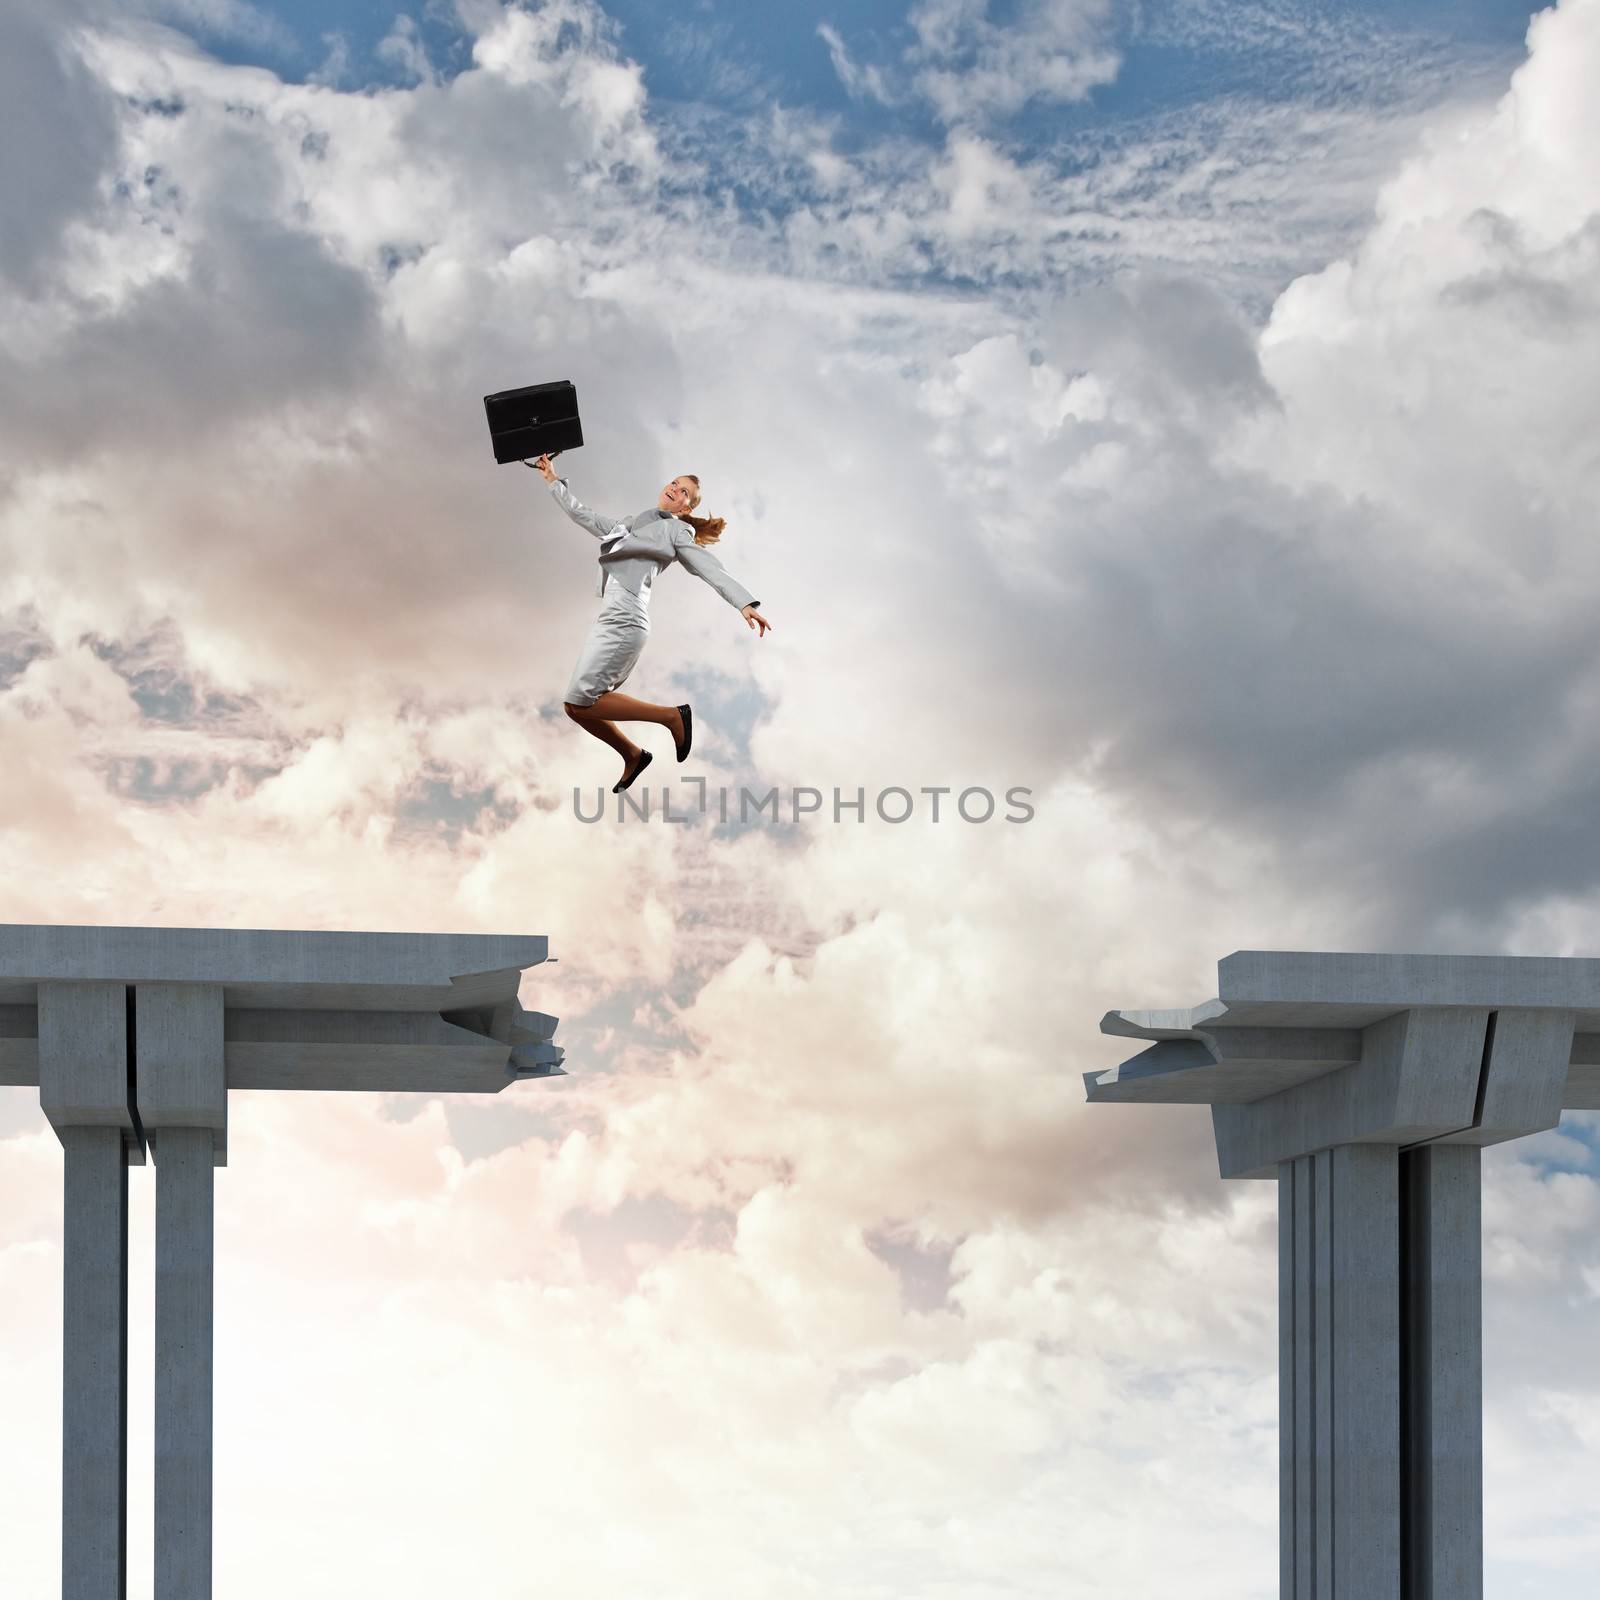 Young woman jumping over a gap in the bridge as a symbol of risk